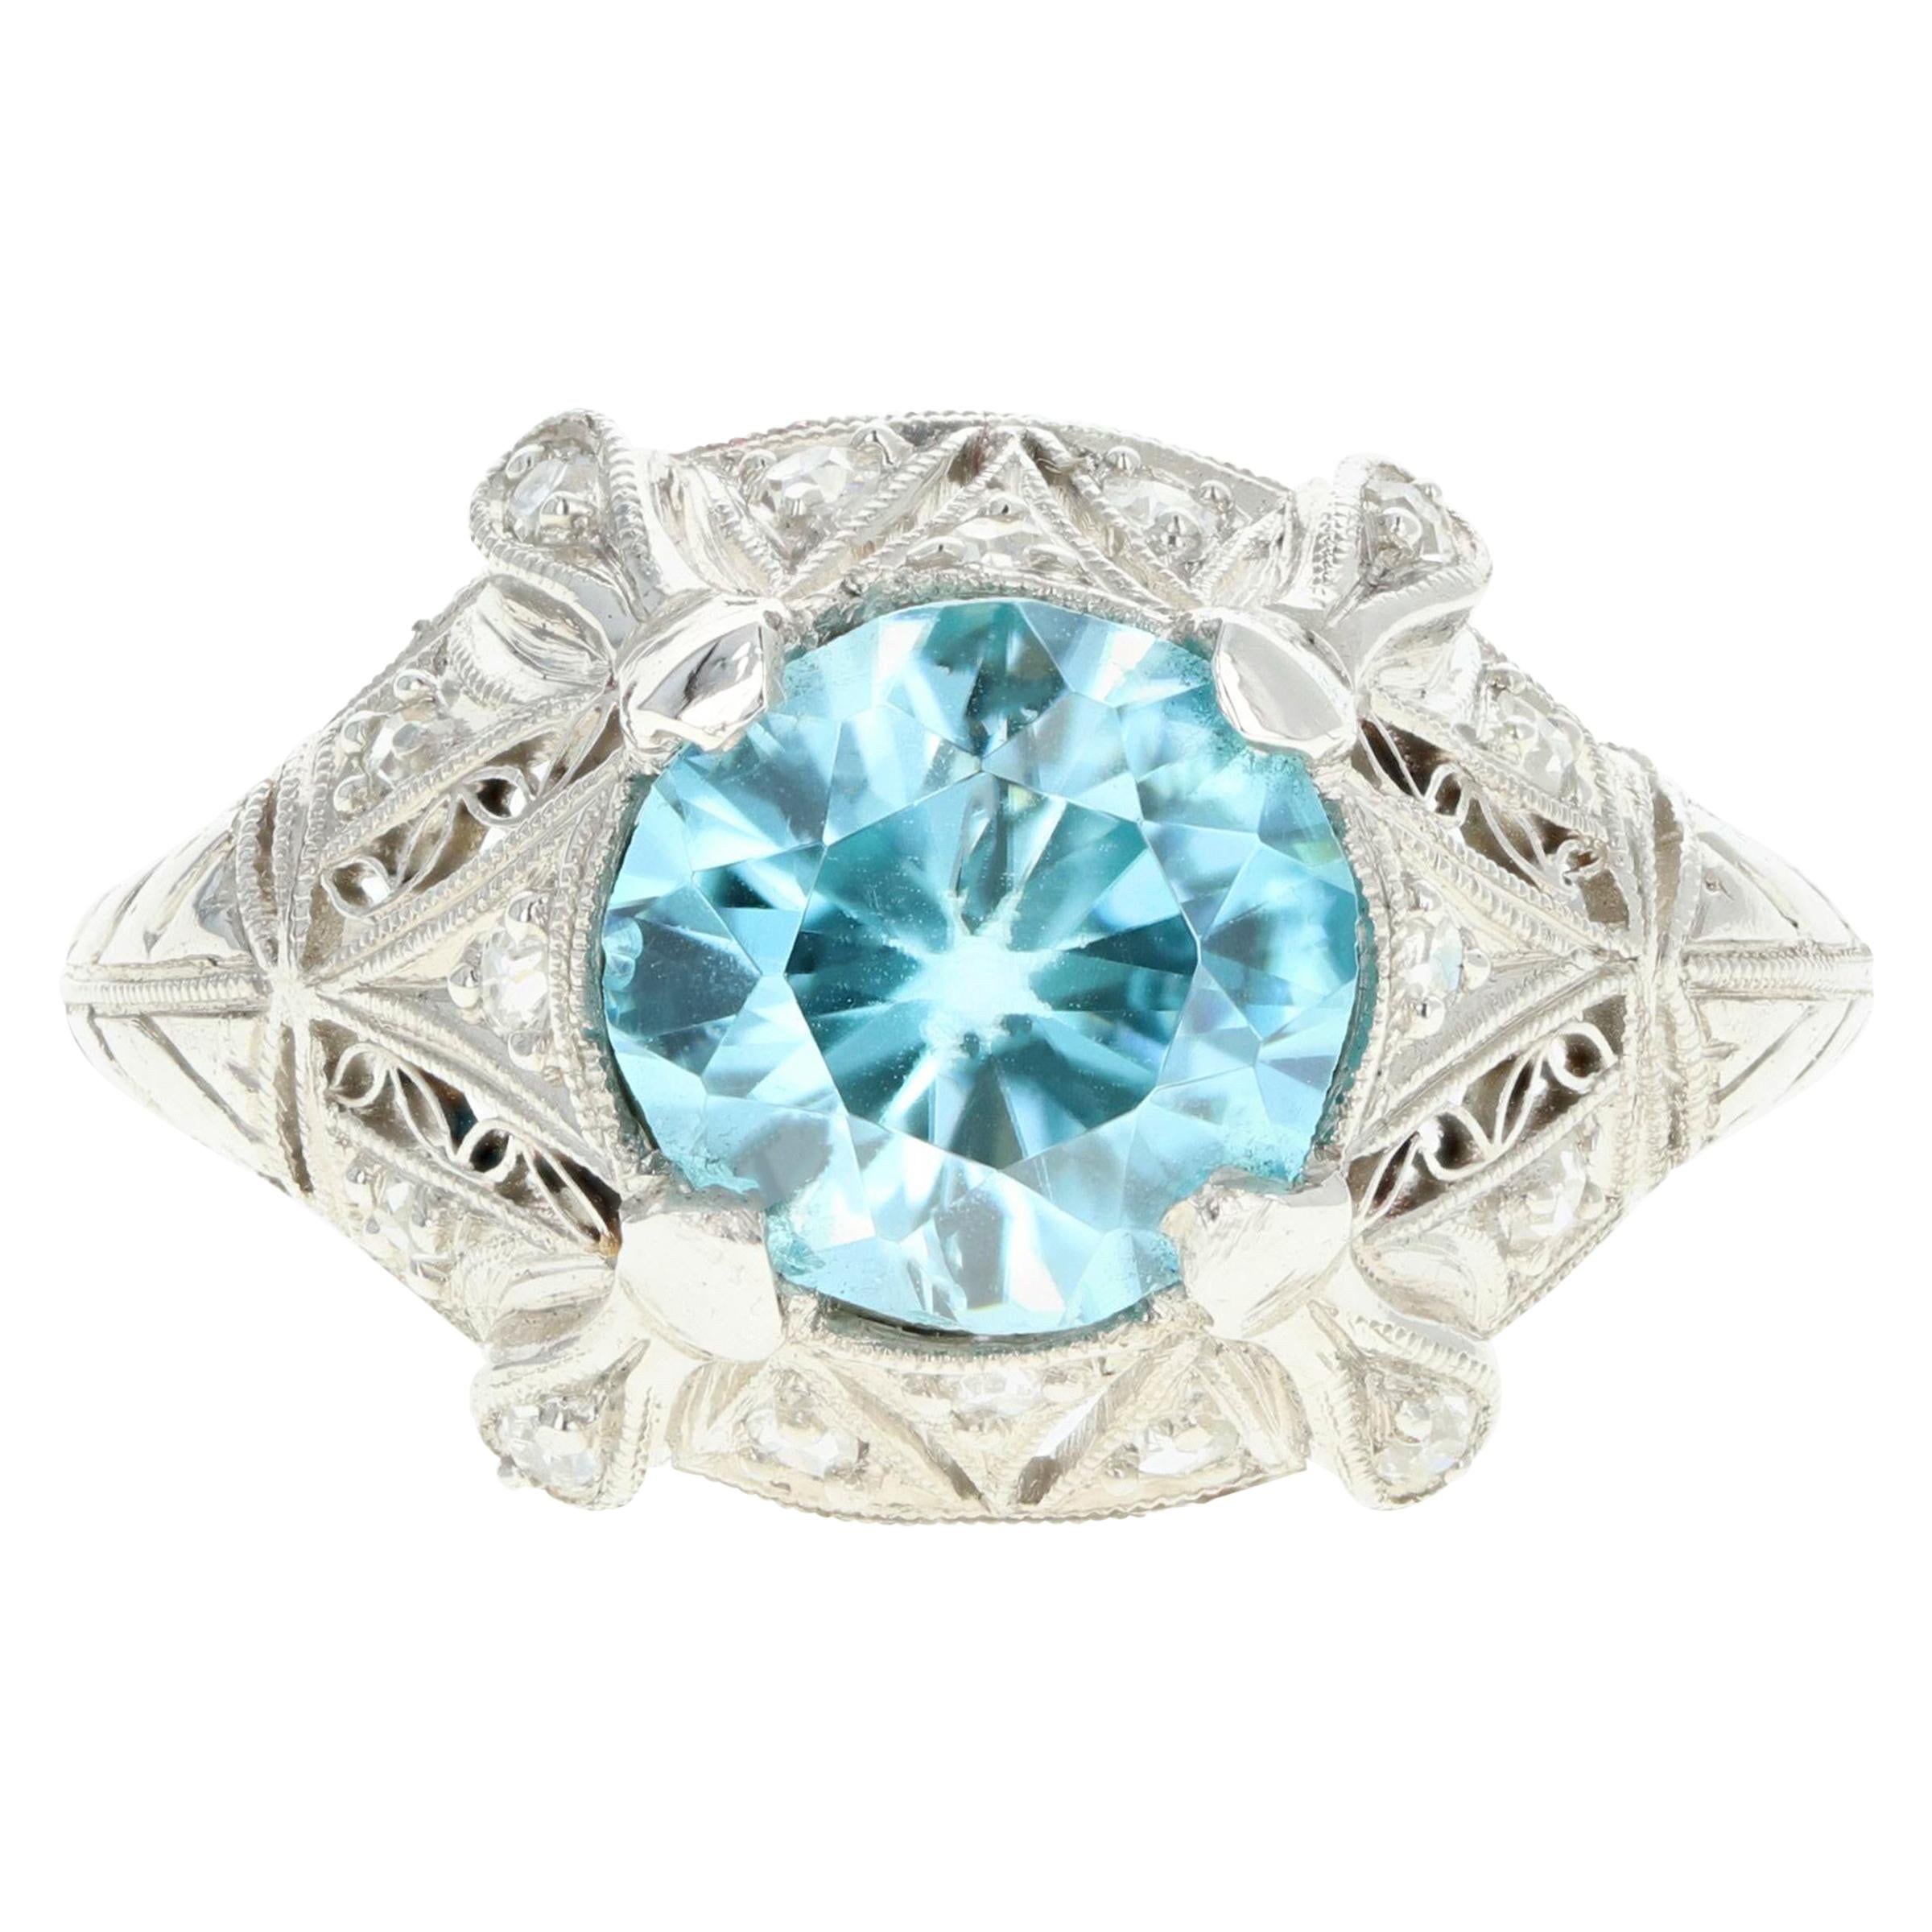 Blue Zircon Cut White Crystal Ring Vintage Engagement Ring Women Fashion Jewelry